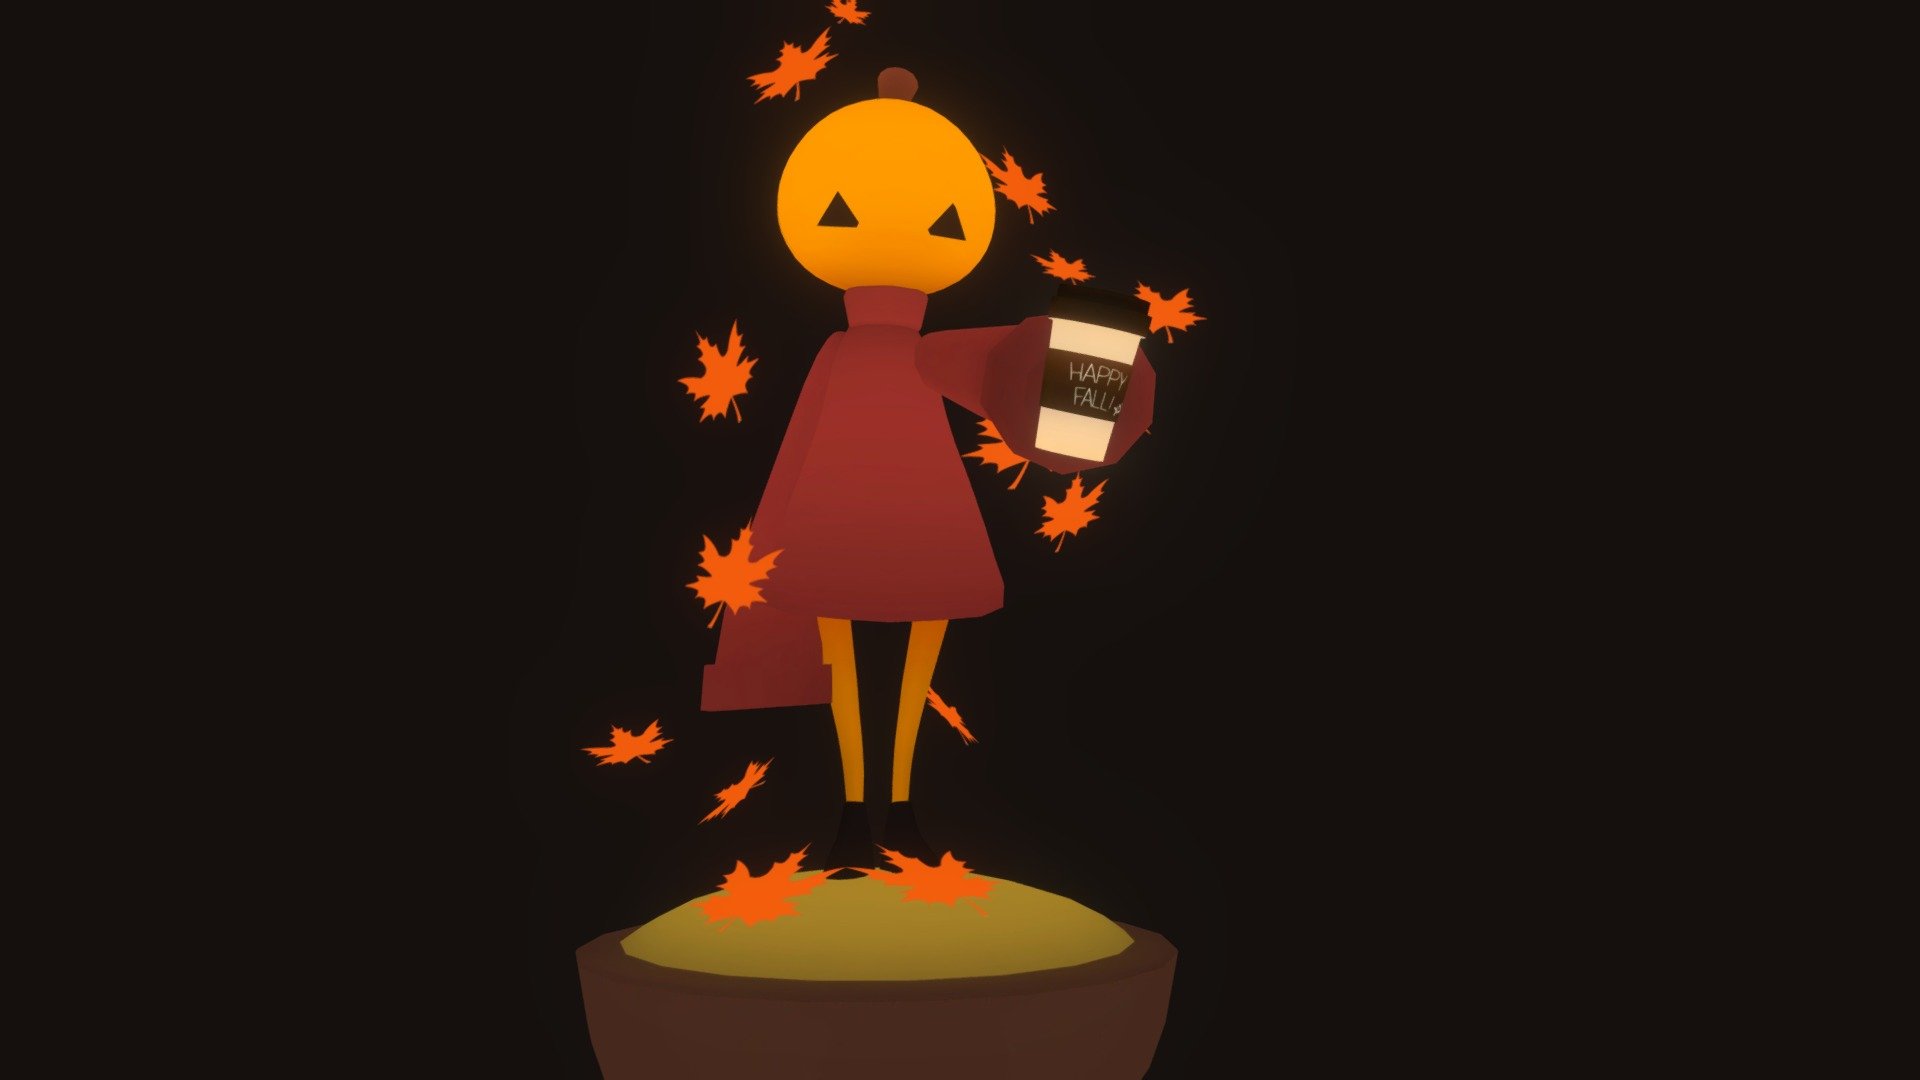 Made for fall art challenge. 

Made using Zbrush, Maya and Photoshop 3d model